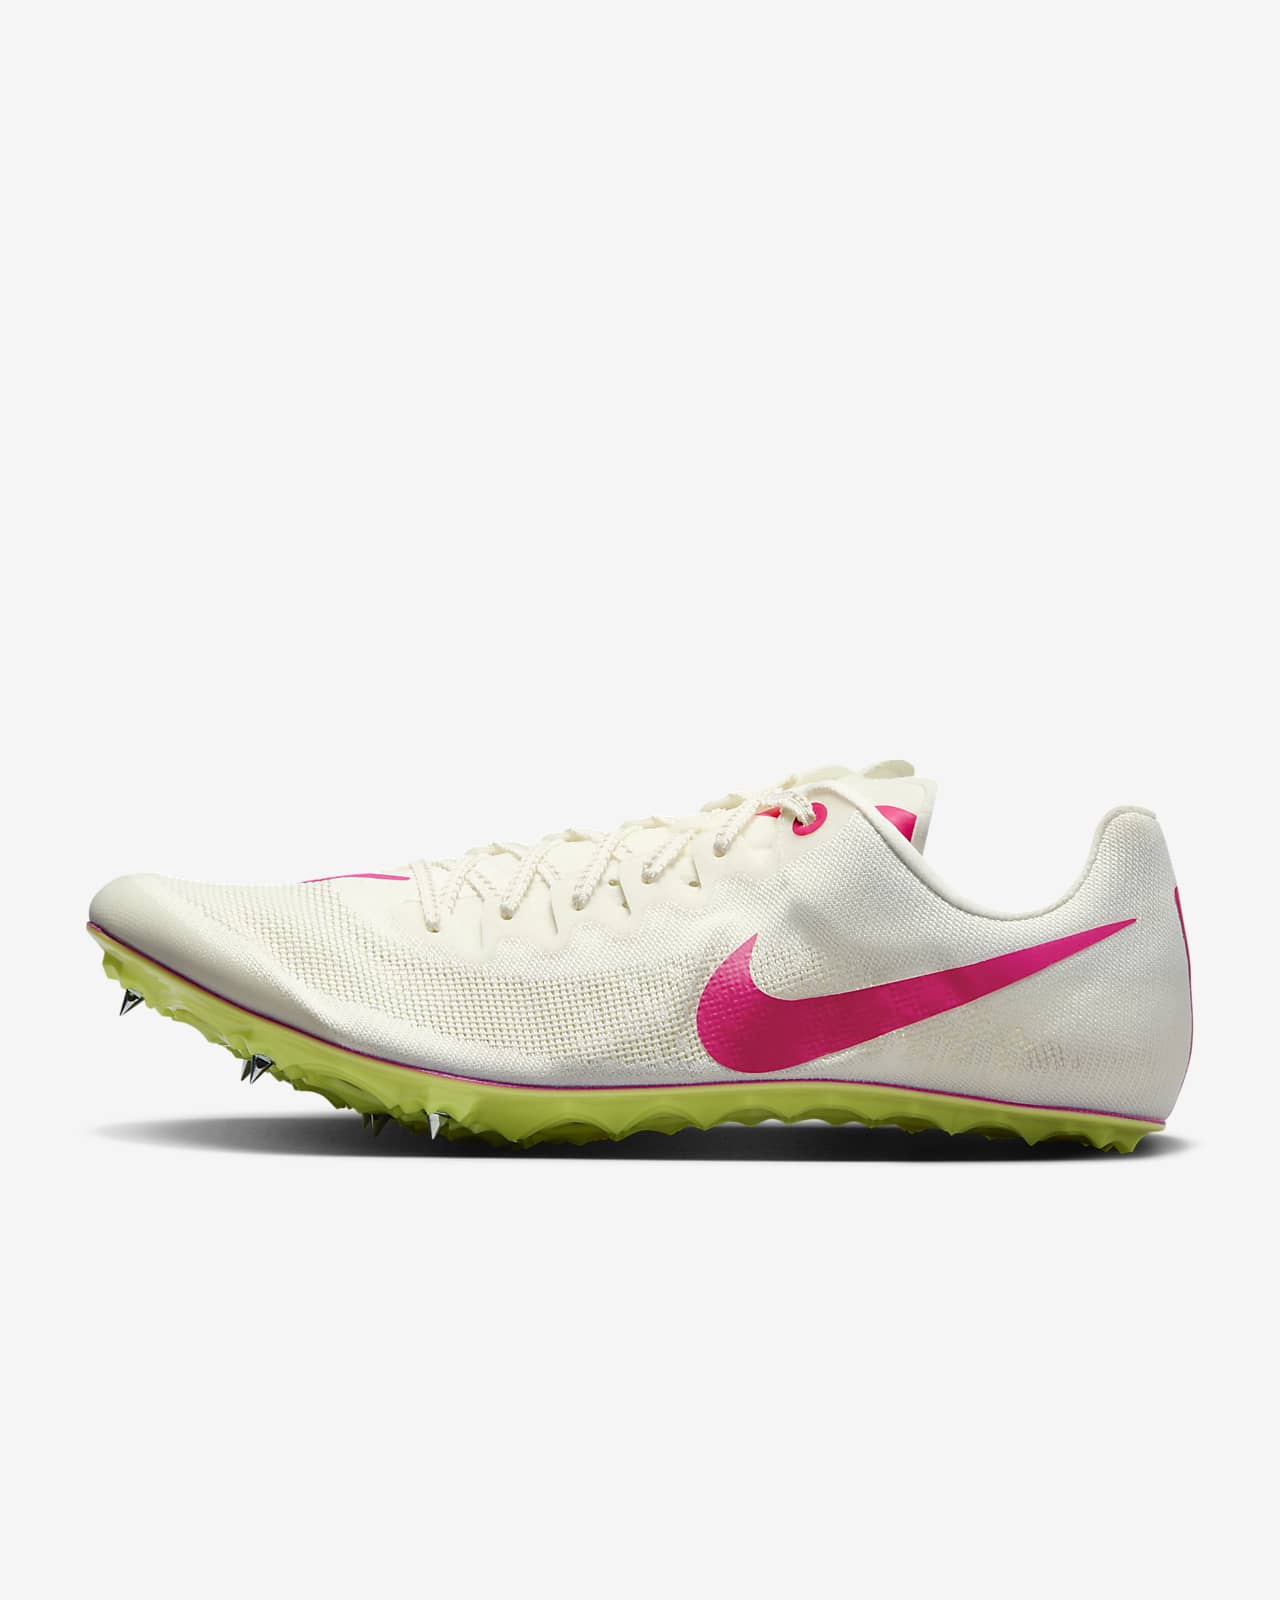 Nike Ja Fly 4 Track and Field sprinting spikes